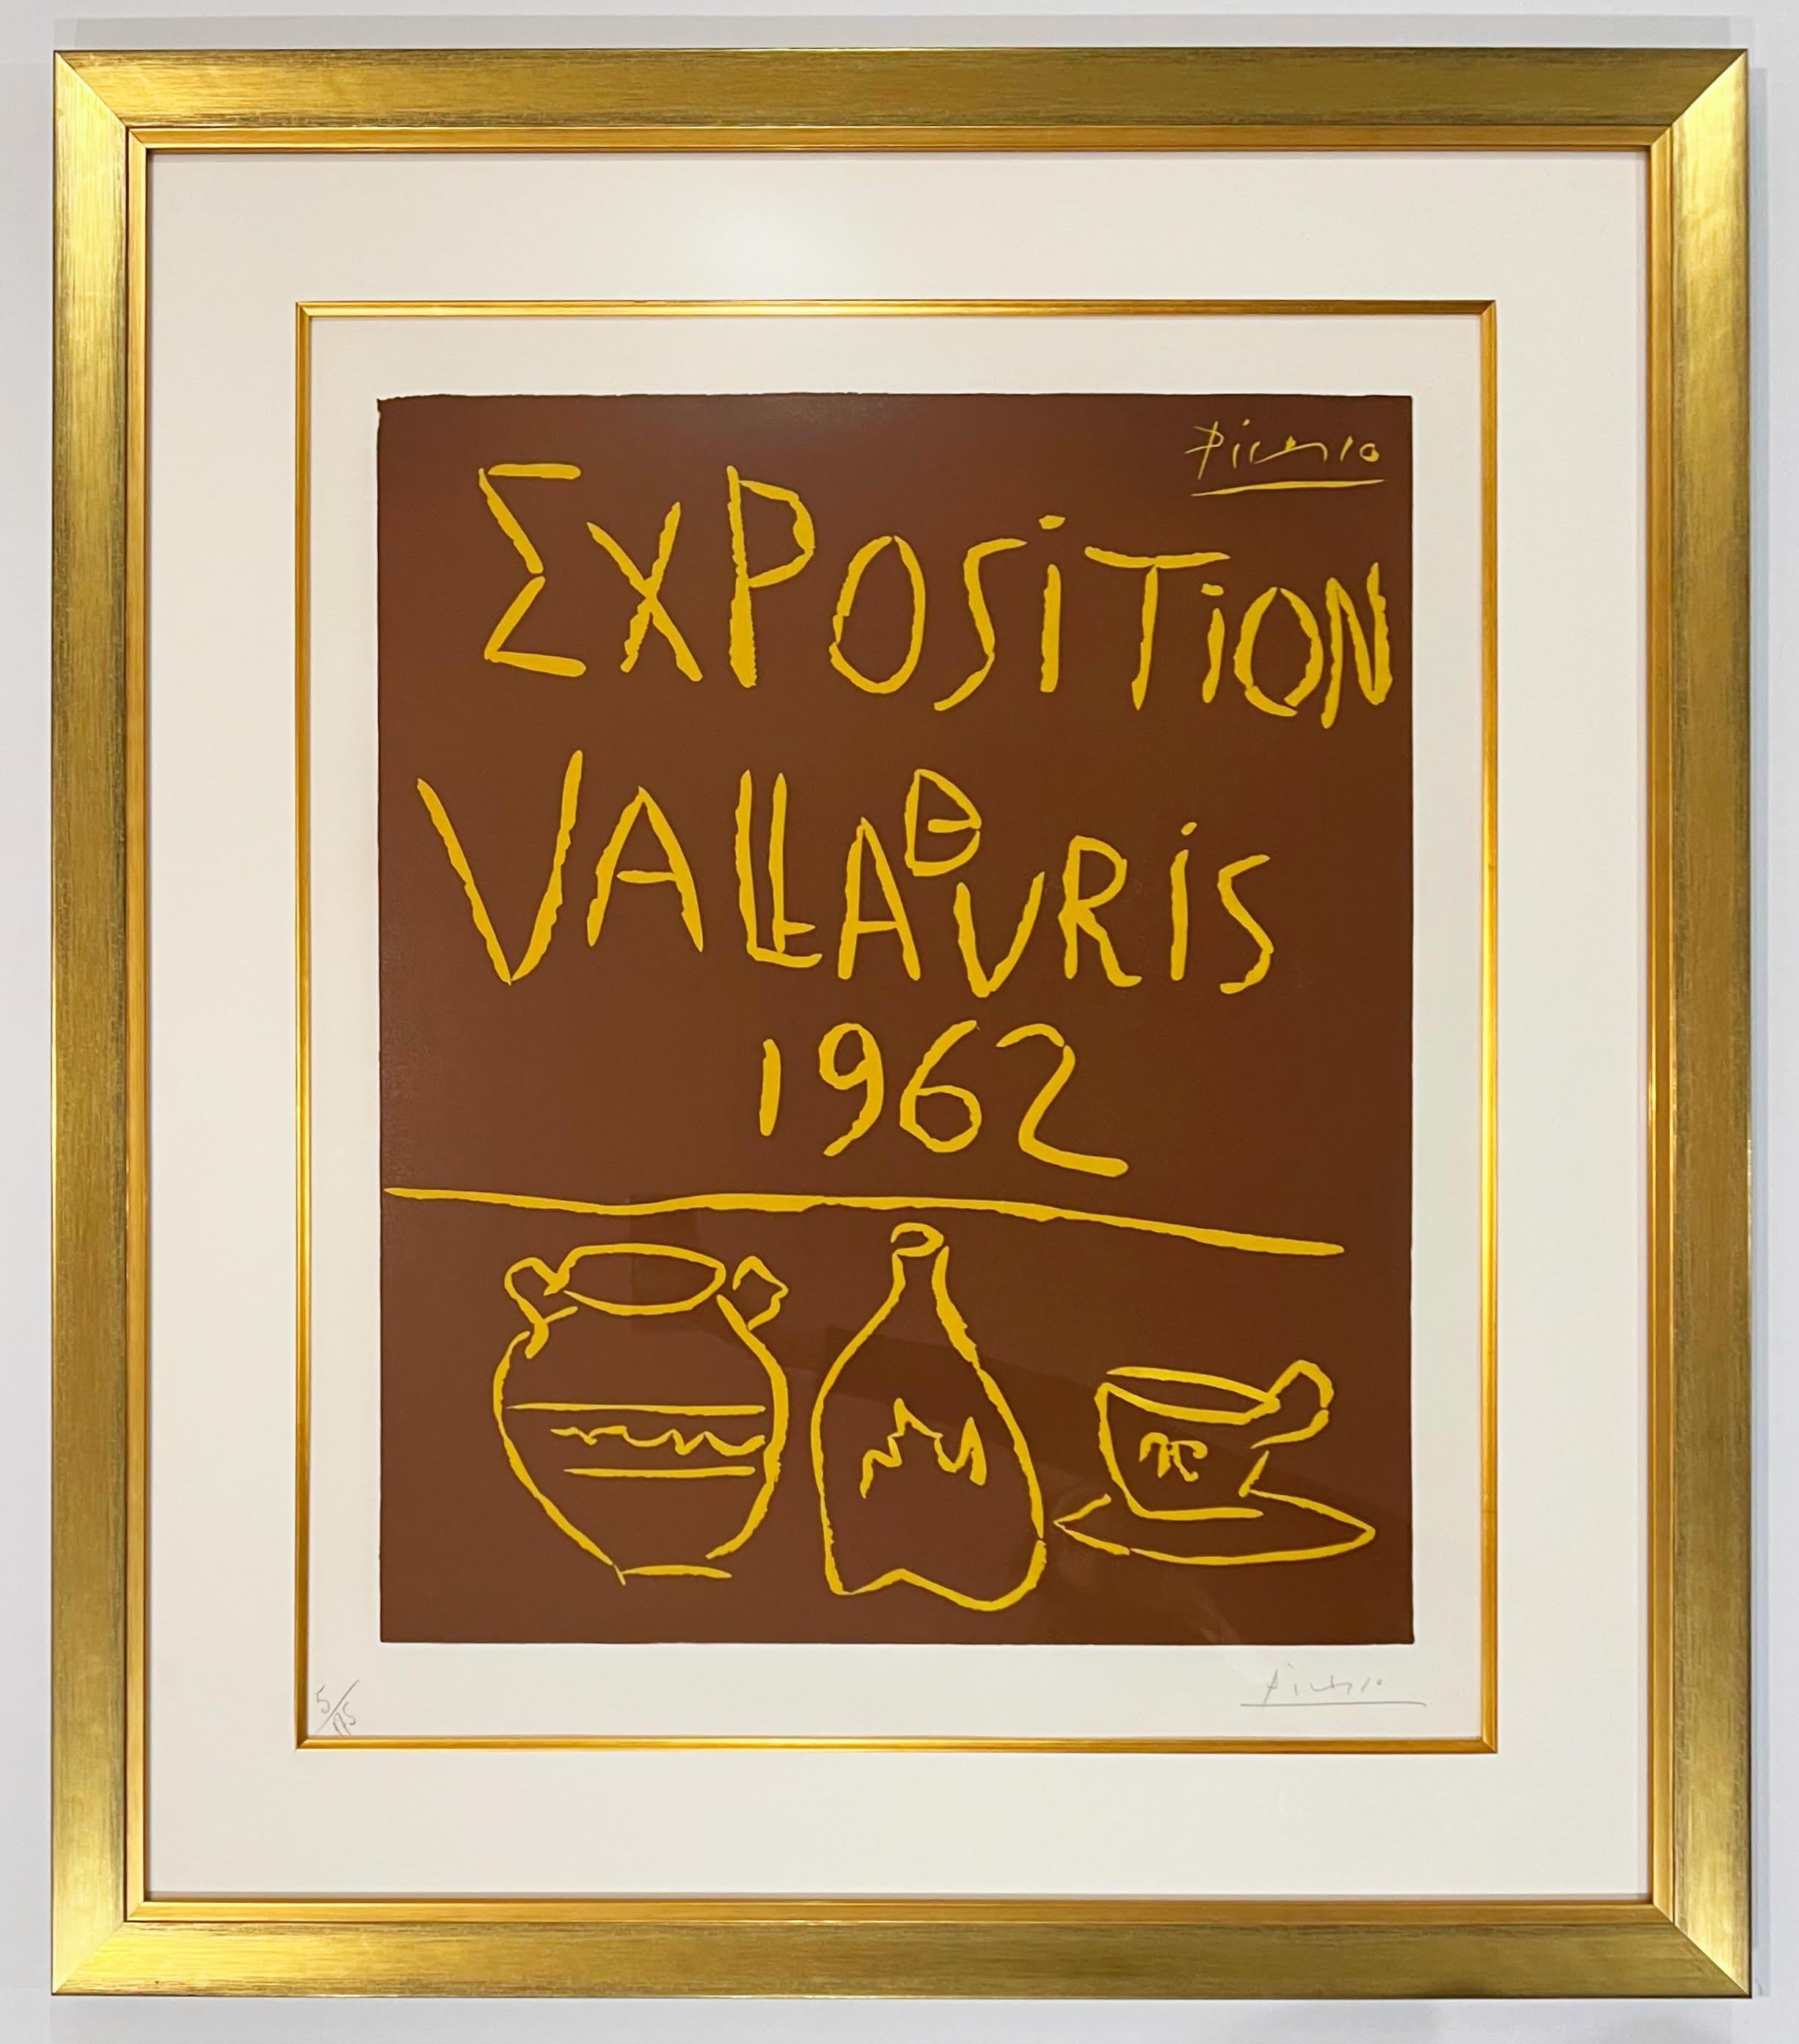 Exposition Vallauris 1962 - Print by Pablo Picasso